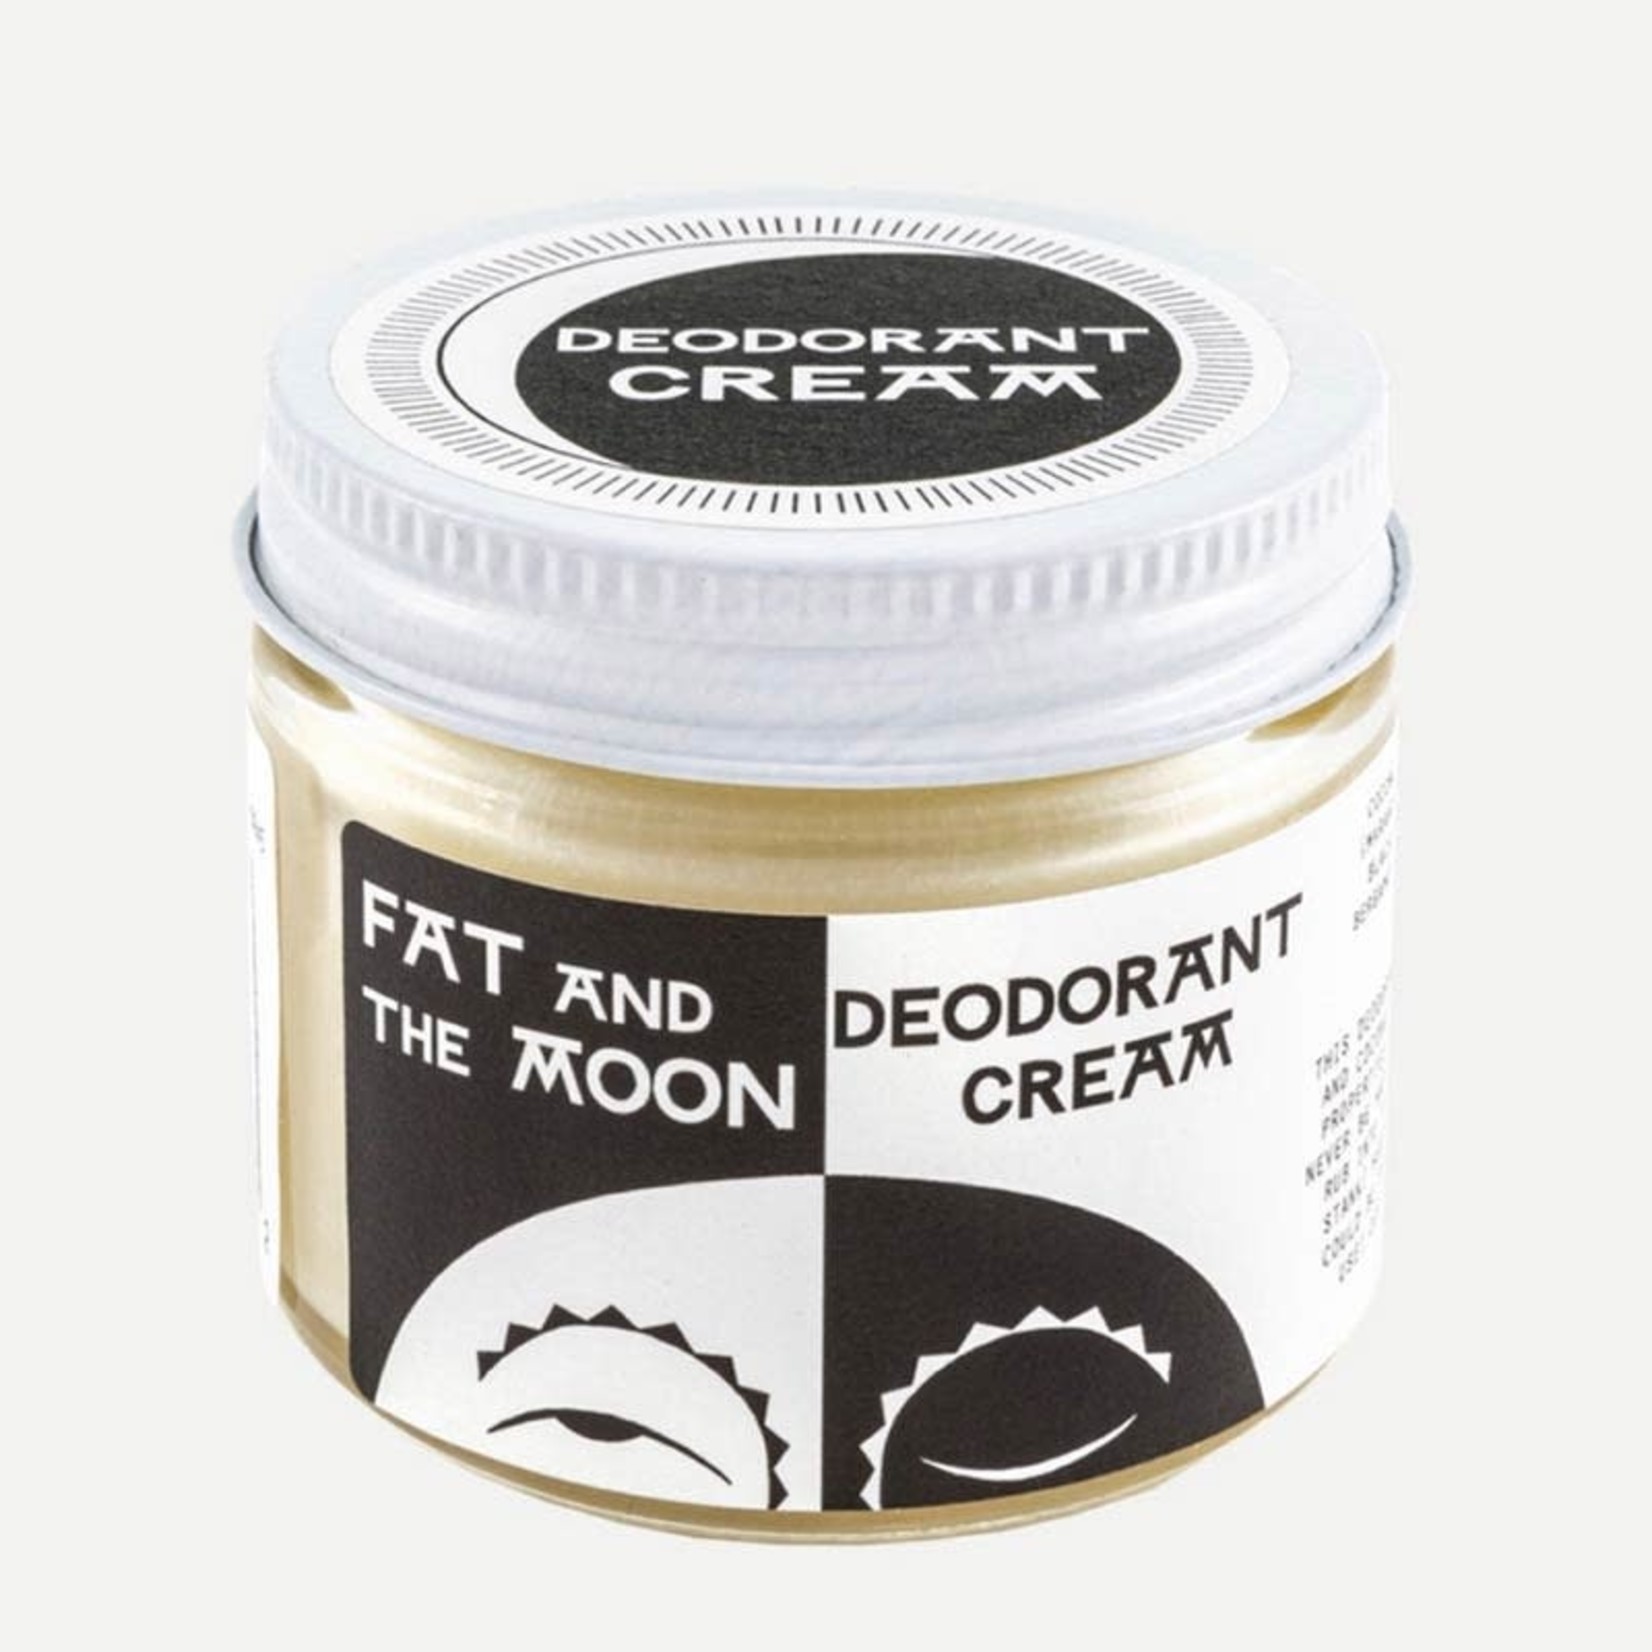 Fat & the Moon Deodorant Cream by Fat & the Moon